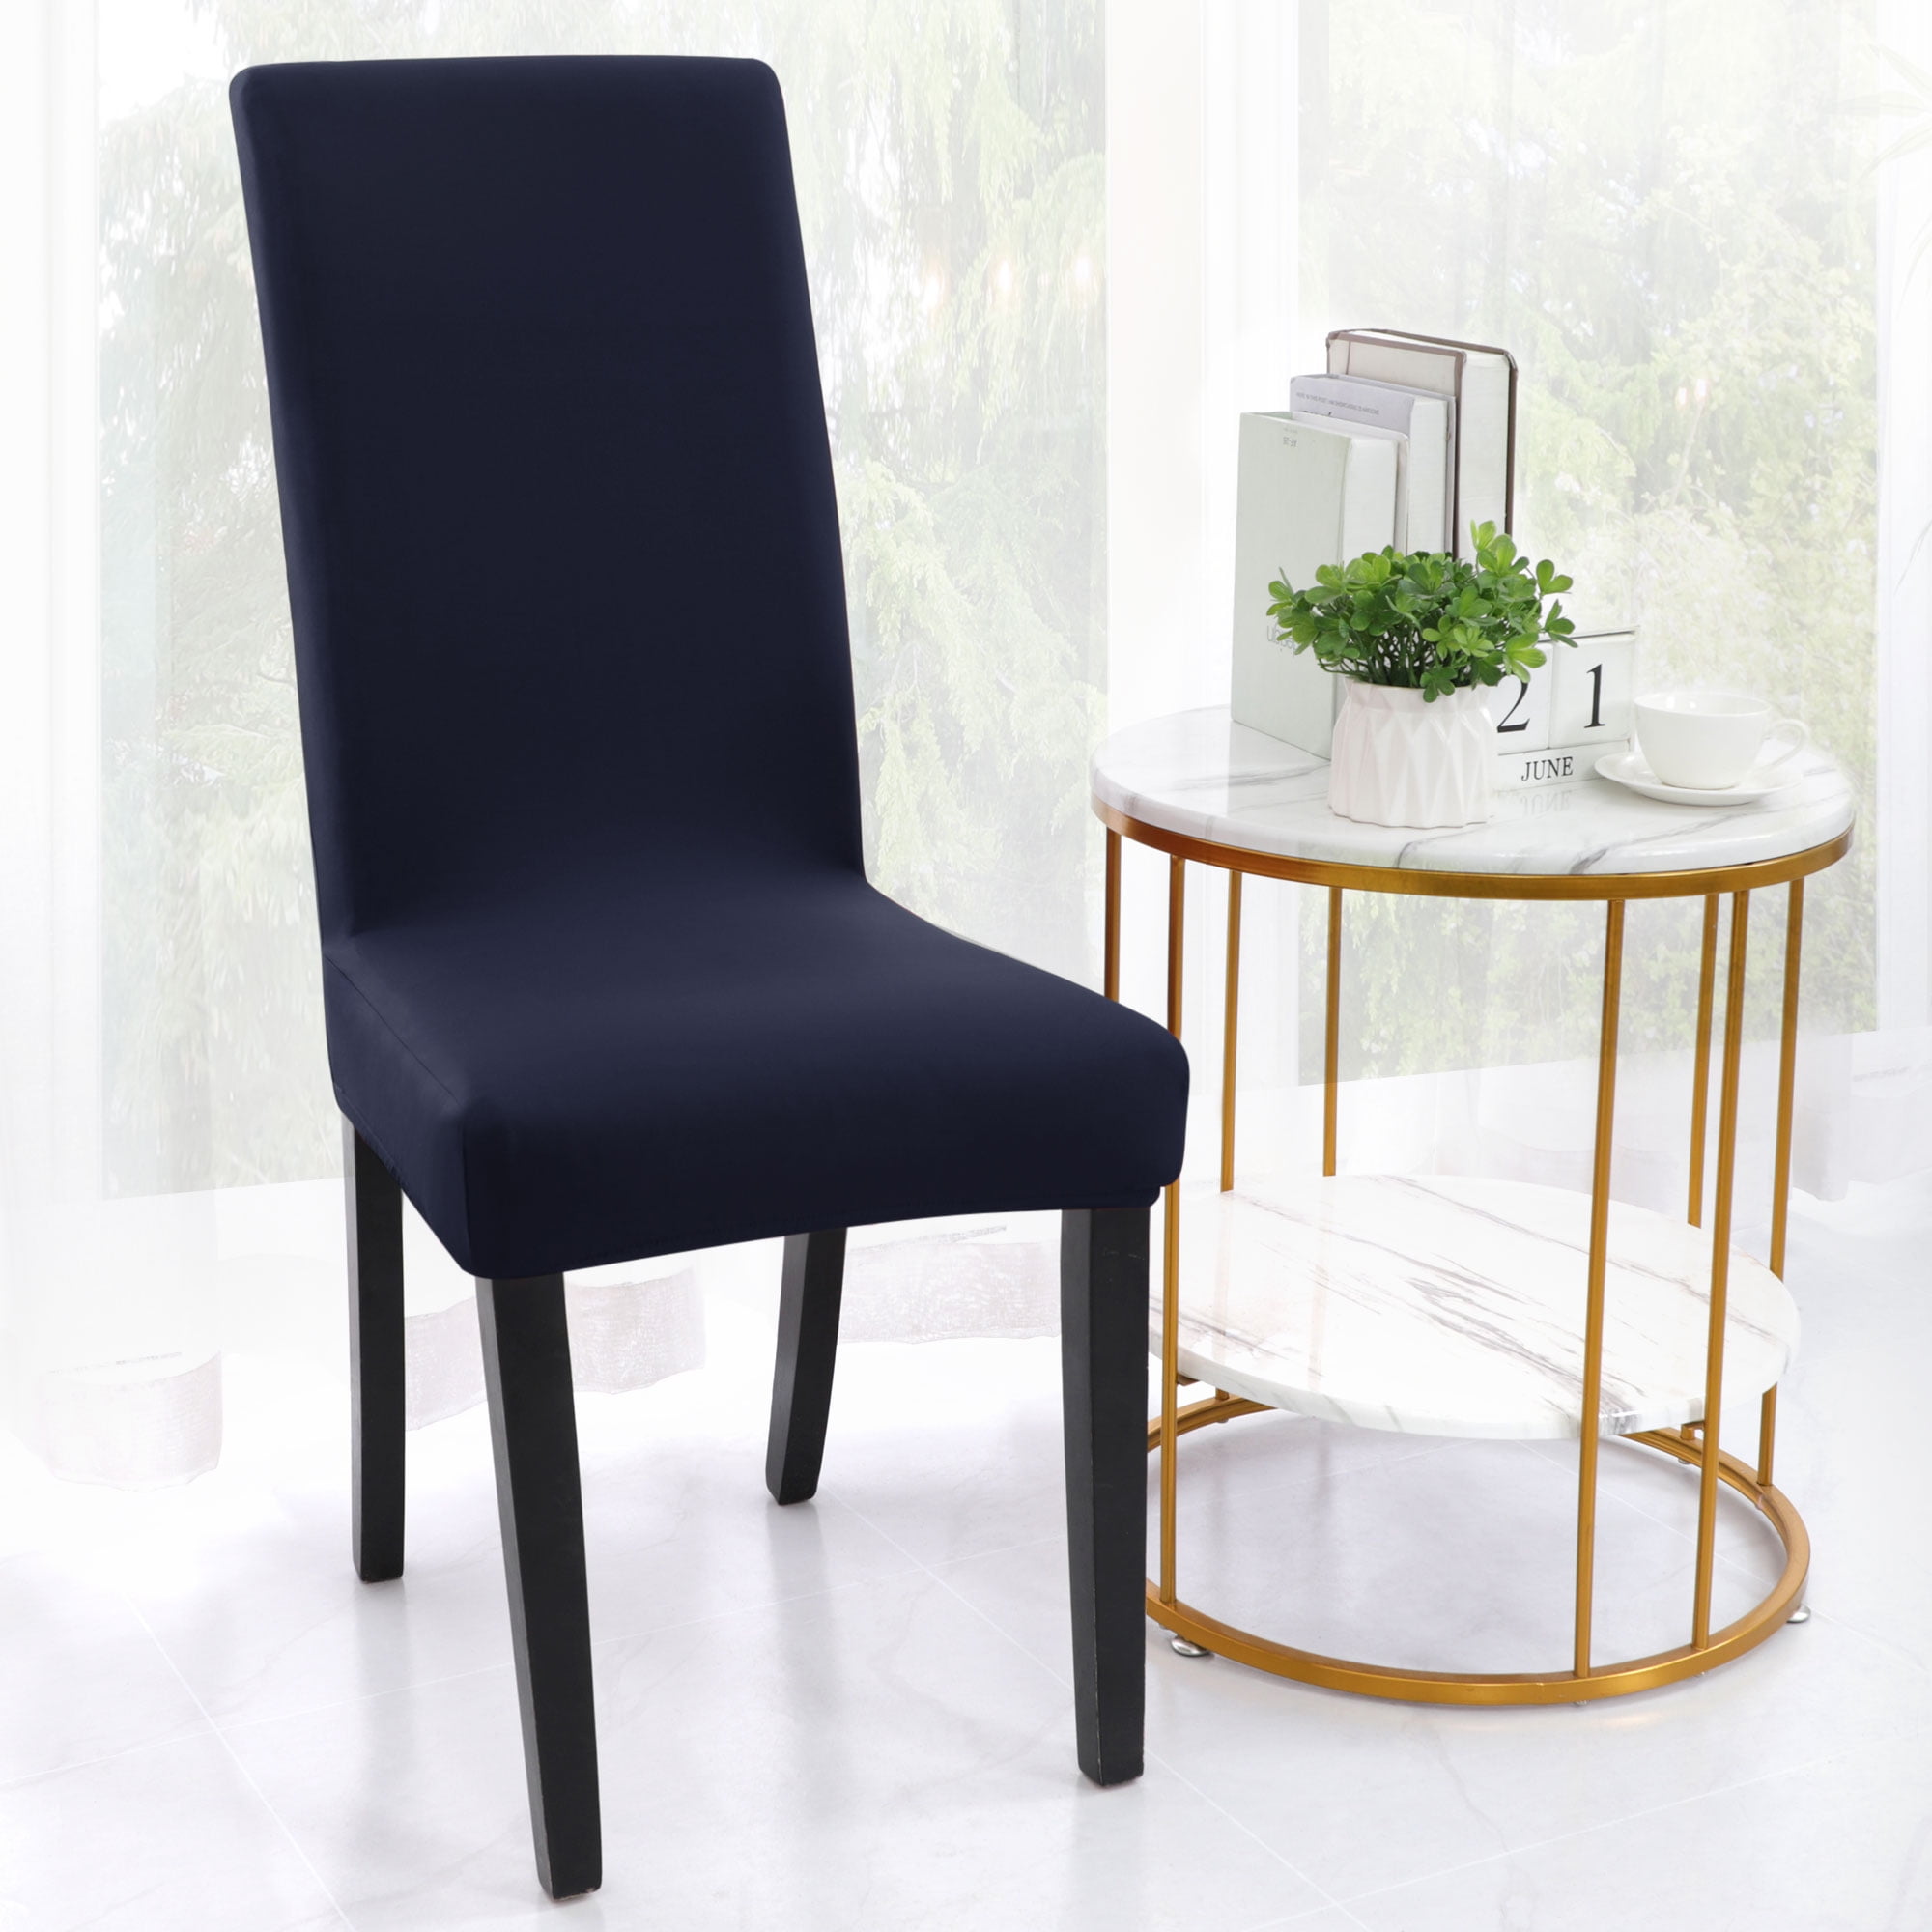 Details about   Dining Chair Covers Washable Stretch Chair Slipcover Removable Chair Protector 